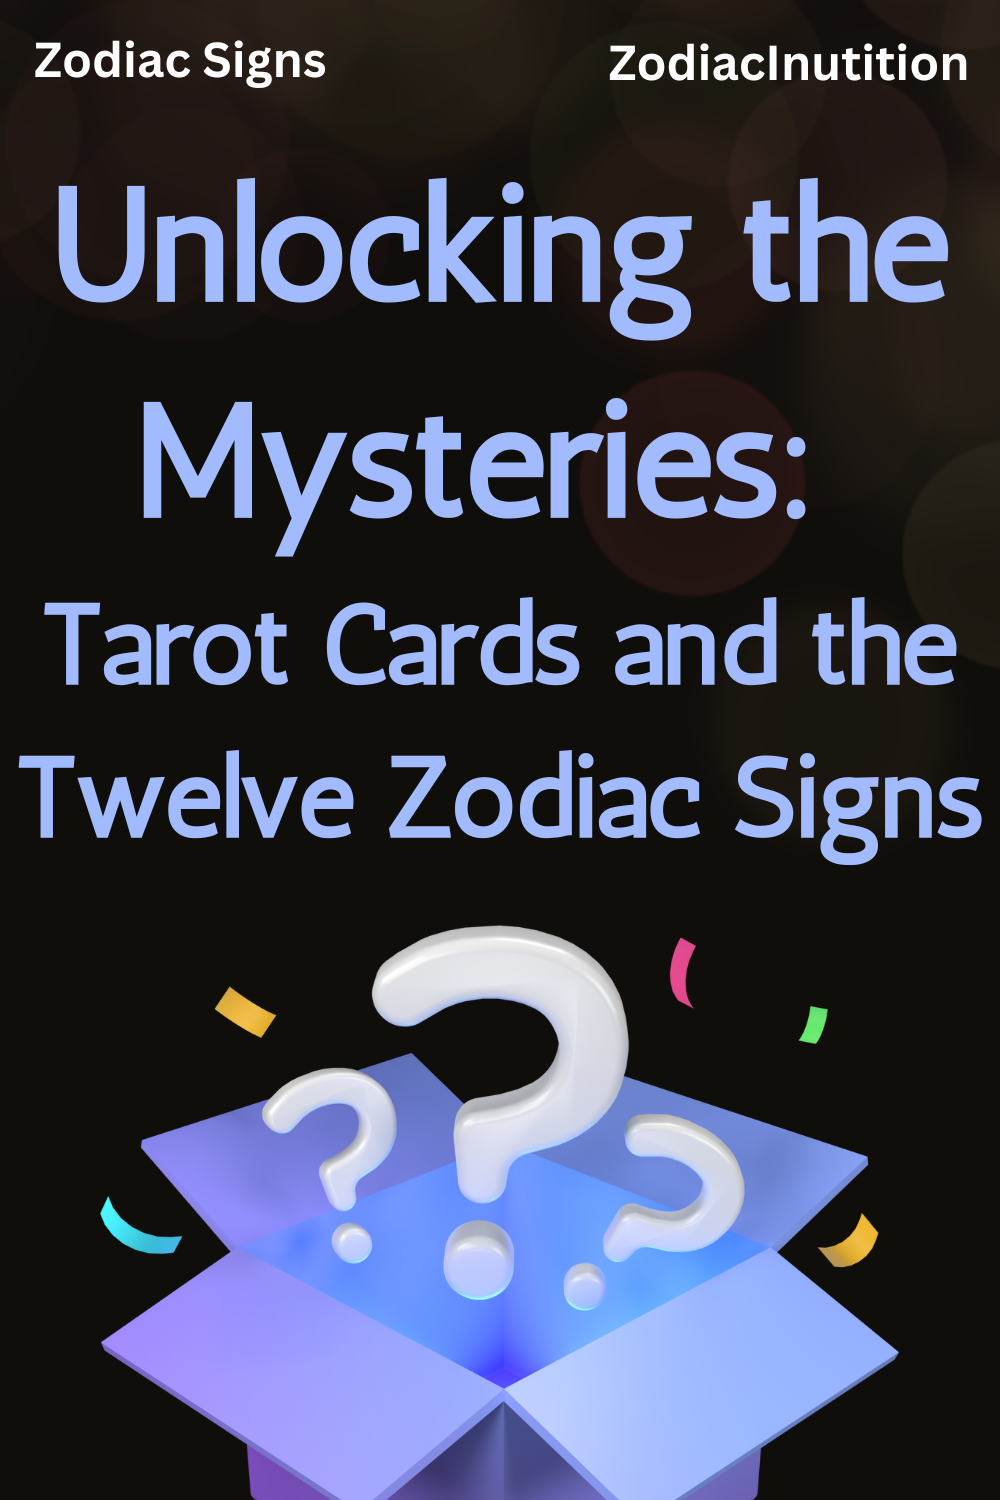 Unlocking the Mysteries: Tarot Cards and the Twelve Zodiac Signs